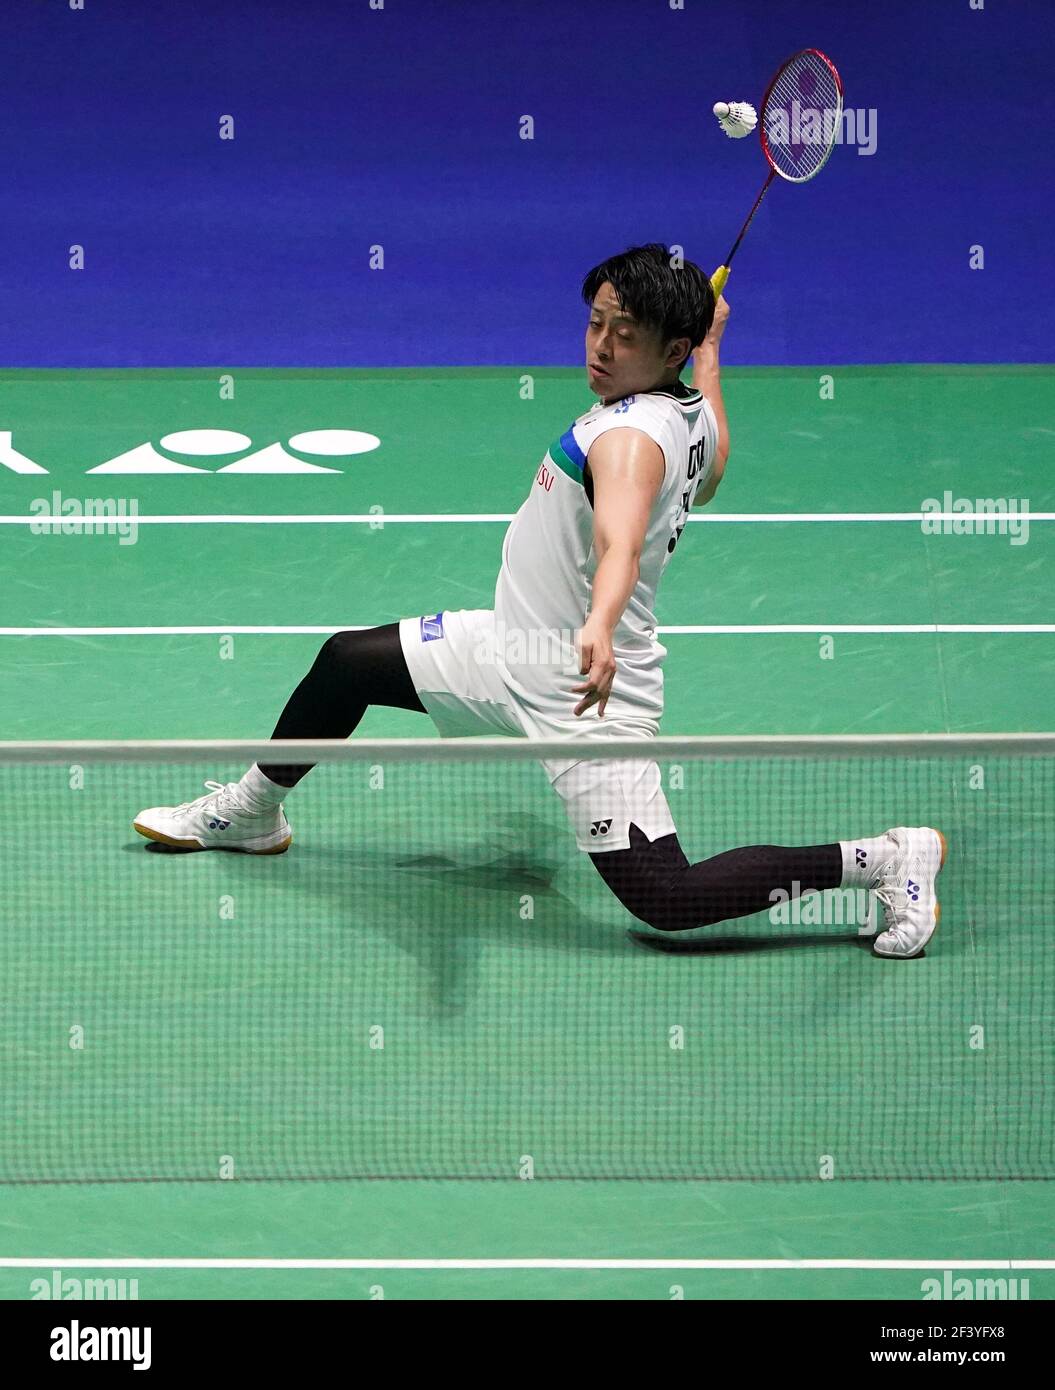 Japan's Akira Koga in action during their match against Japan's Keigo Sonoda and Takeshi Kamura on day two of the YONEX All England Open Badminton Championships at Utilita Arena Birmingham. Picture date: Thursday March 18, 2021. Stock Photo